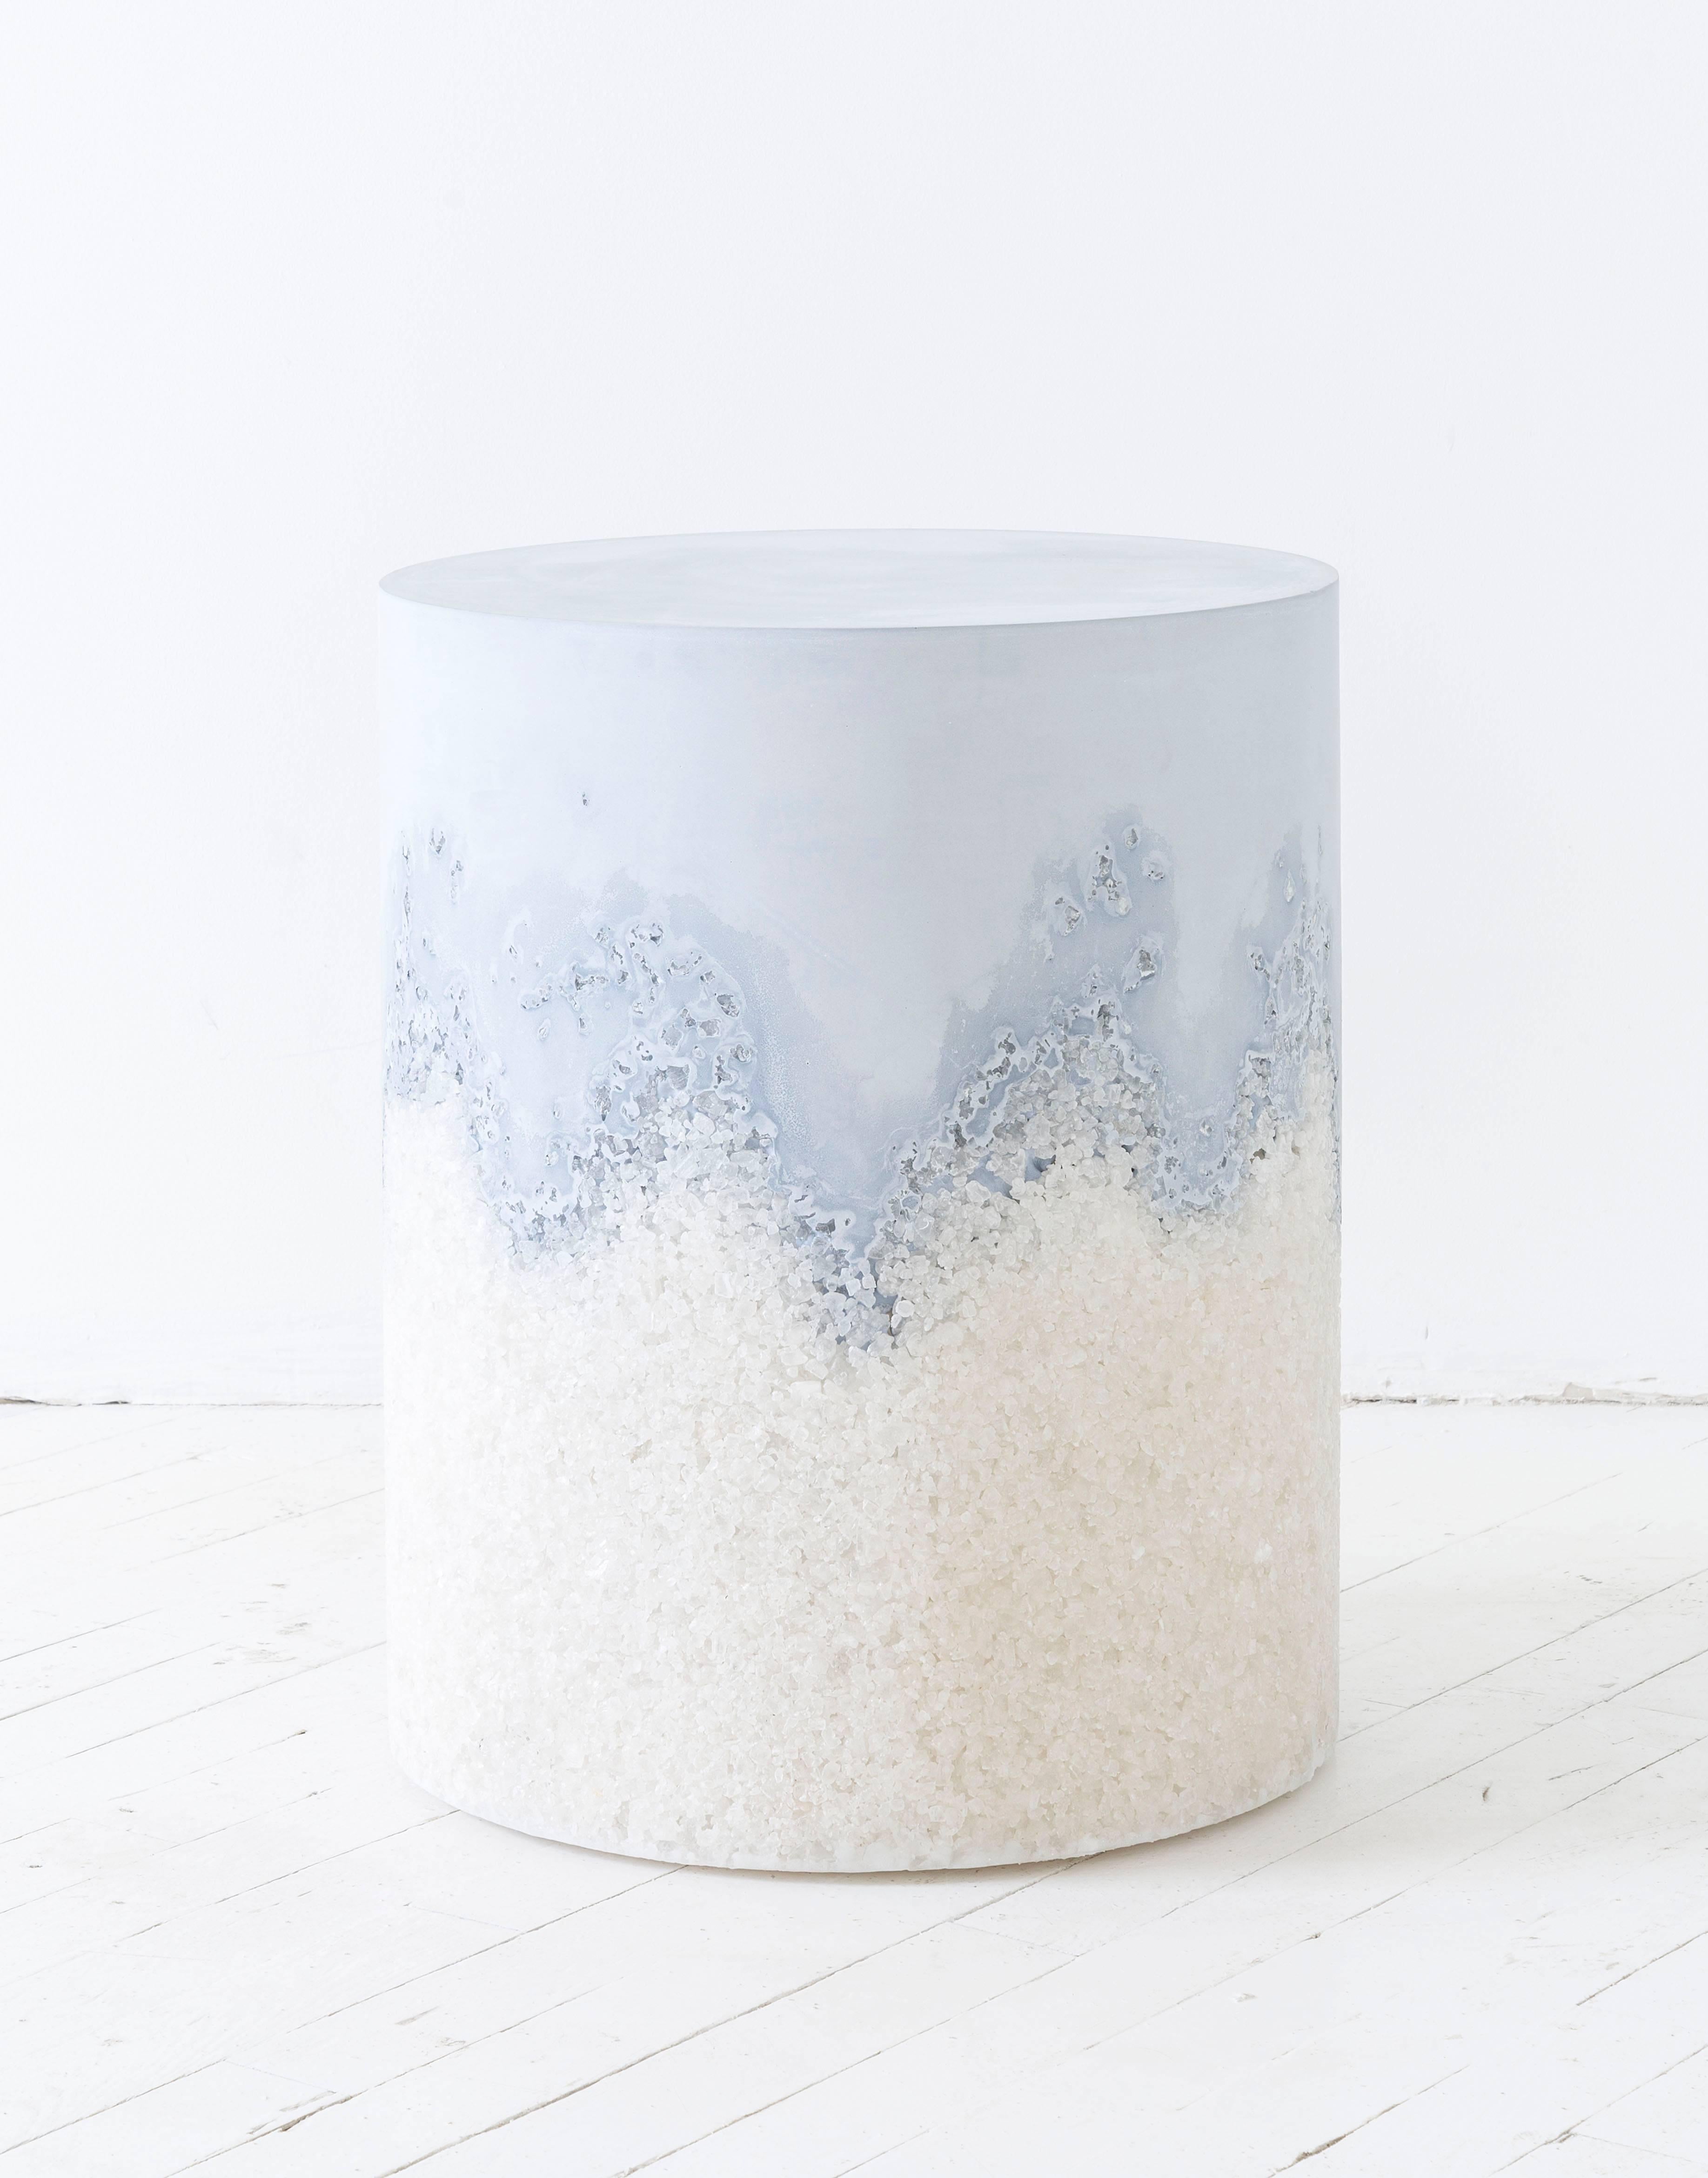 This made-to-order drum consists of a hand-dyed ice blue cement top and a packed white rock salt bottom. The cement is poured by hand over the salt, creating an organic barrier between the two materials. The piece has a hollow cavity and weighs